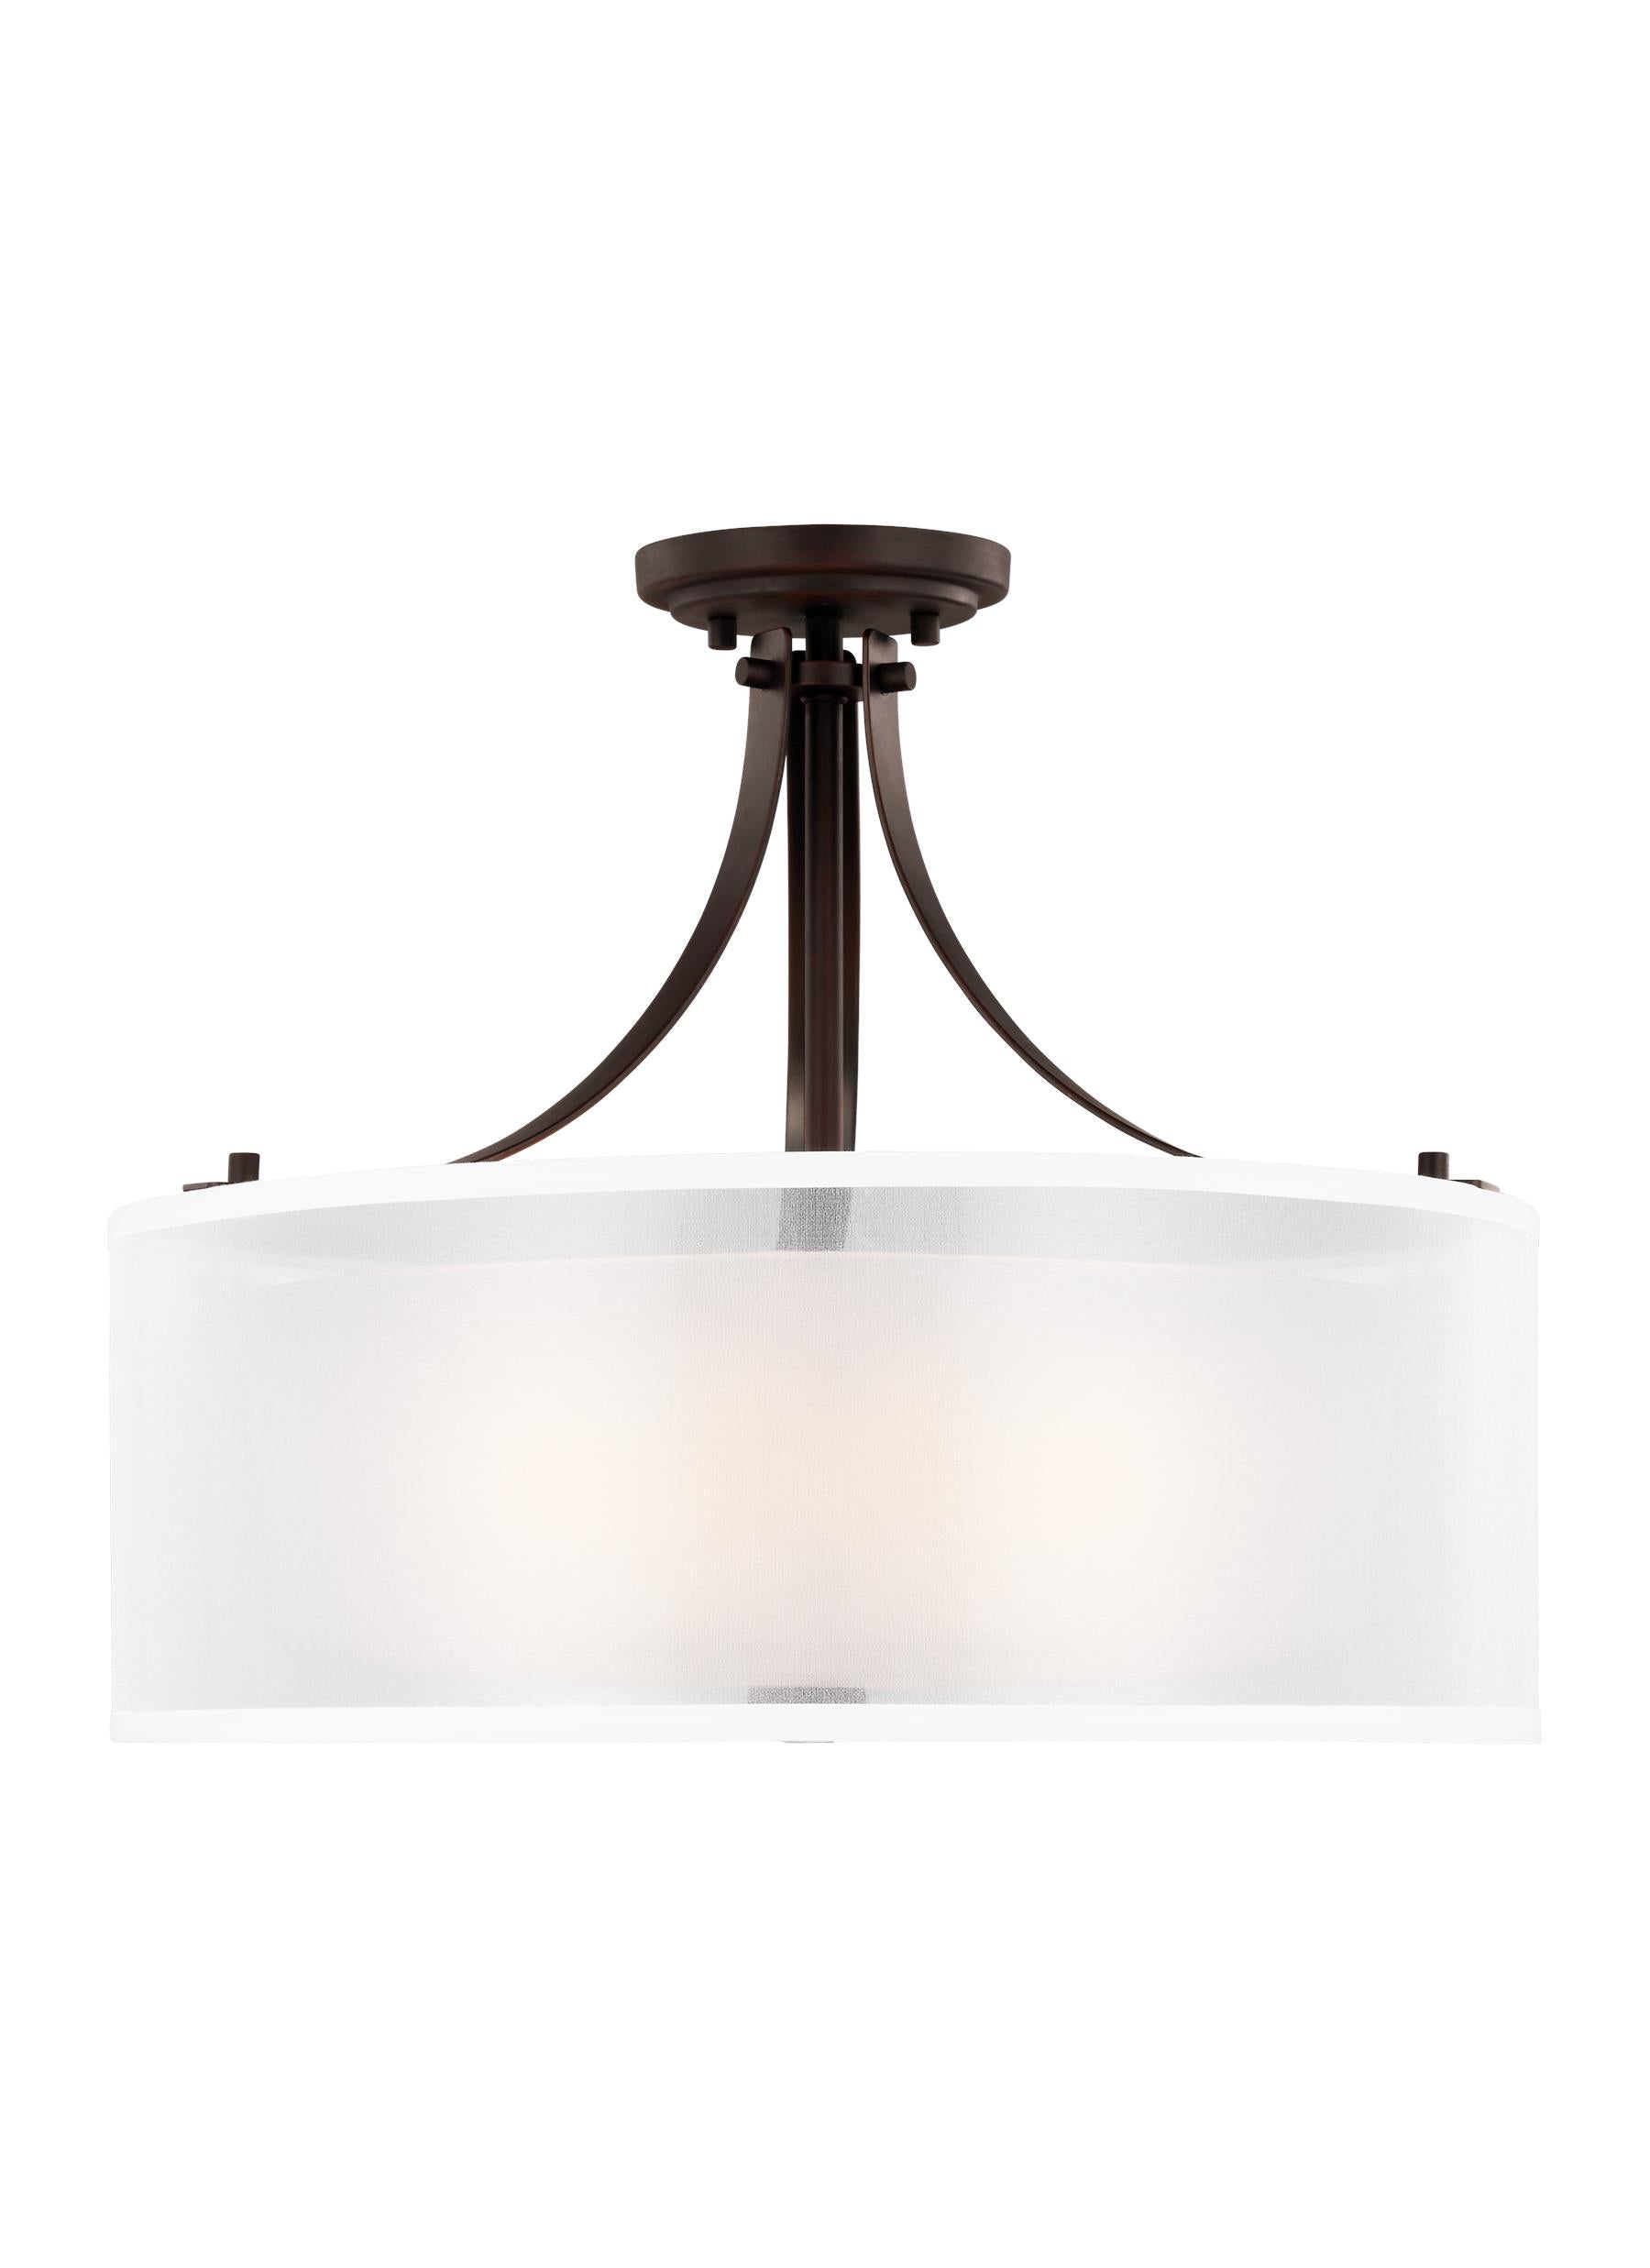 Elmwood Park traditional 3-light indoor dimmable ceiling semi-flush mount in bronze finish with satin etched glass shade a...